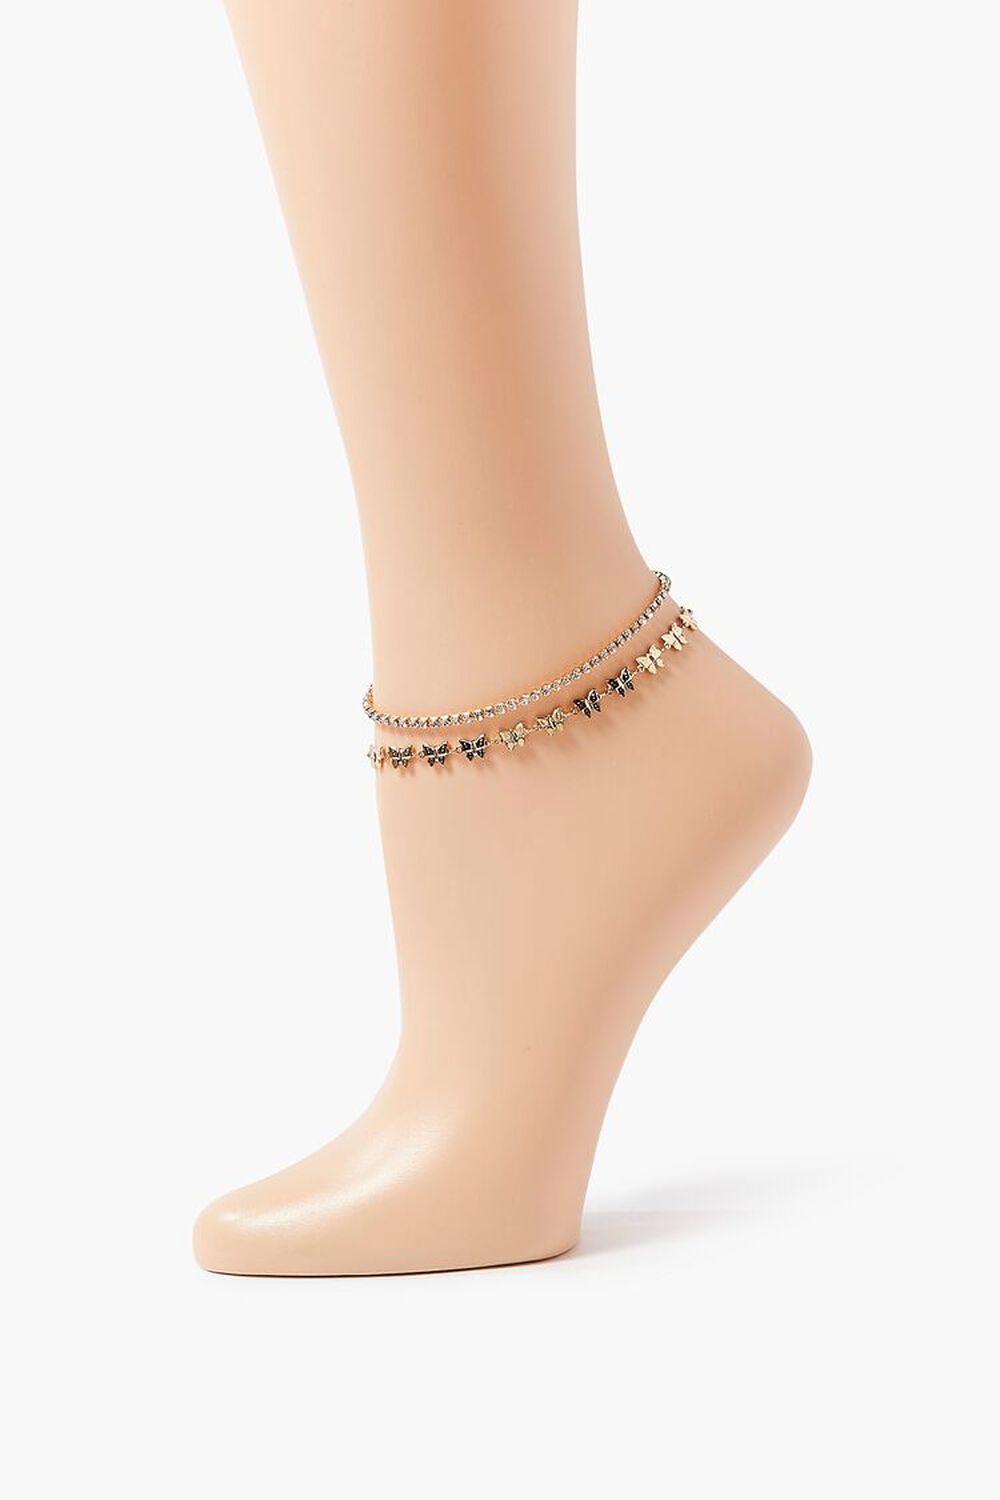 GOLD/CLEAR Rhinestone & Butterfly Anklet Set, image 1